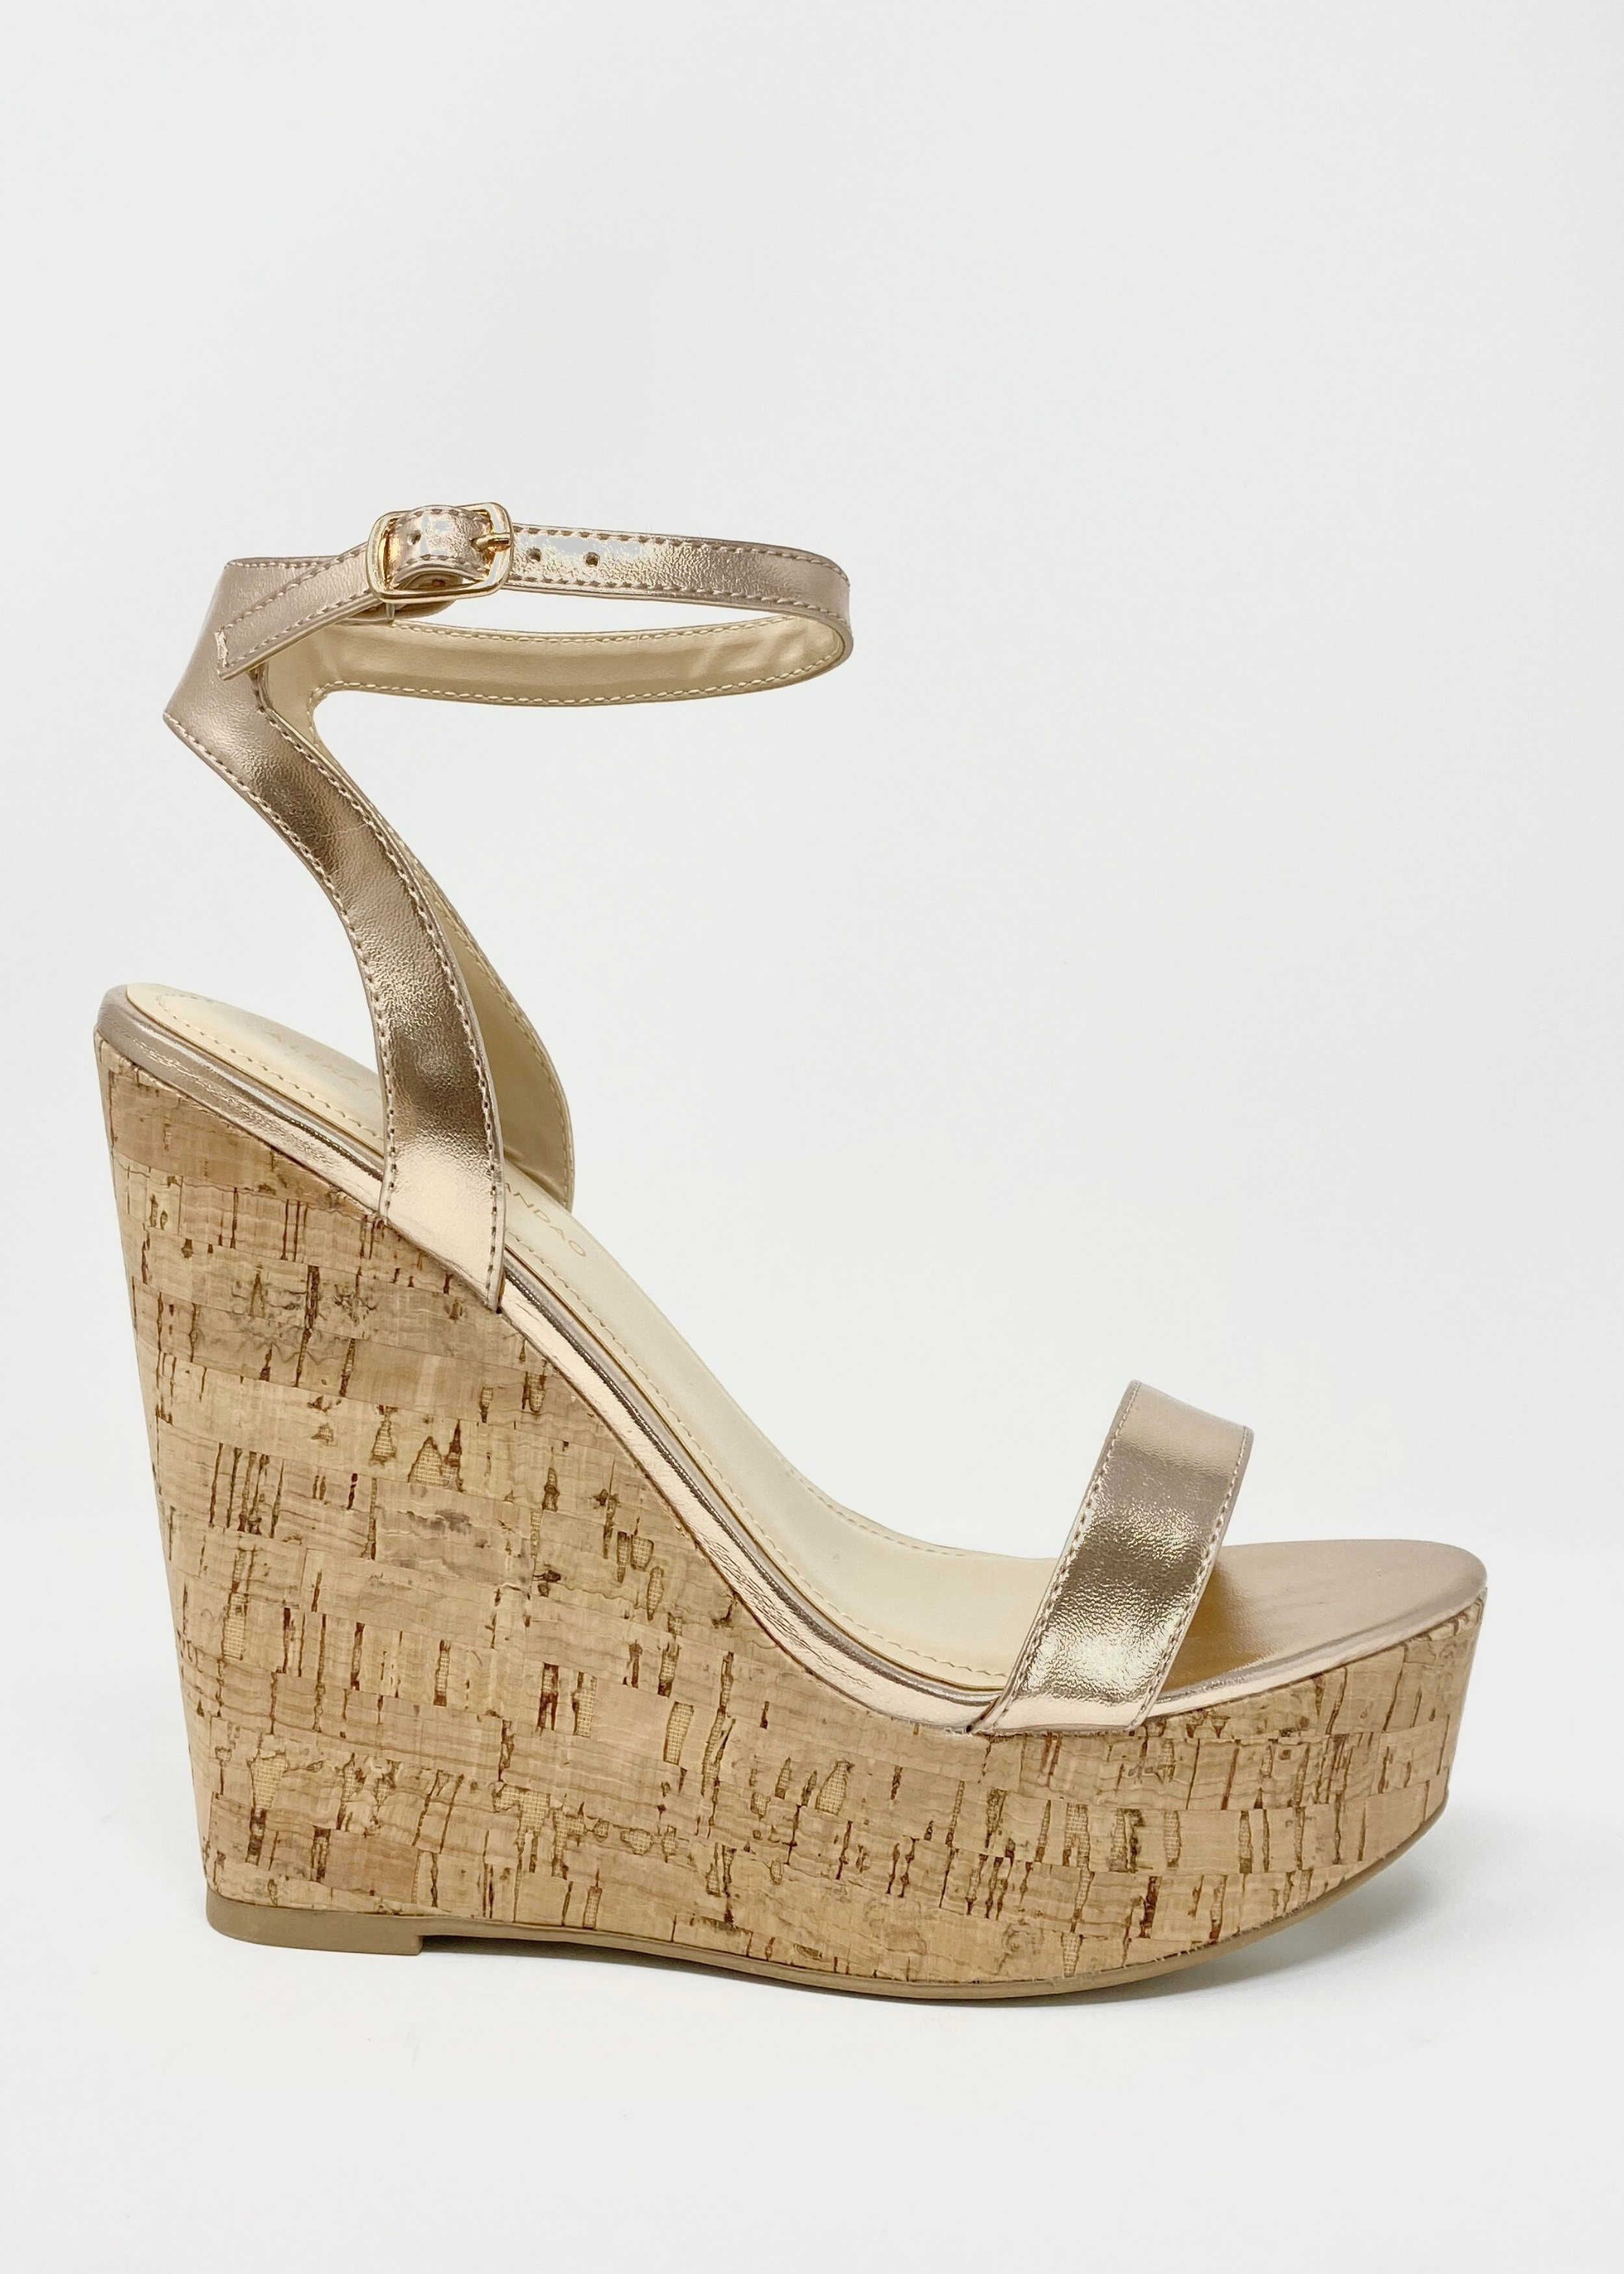 wedge rose gold shoes